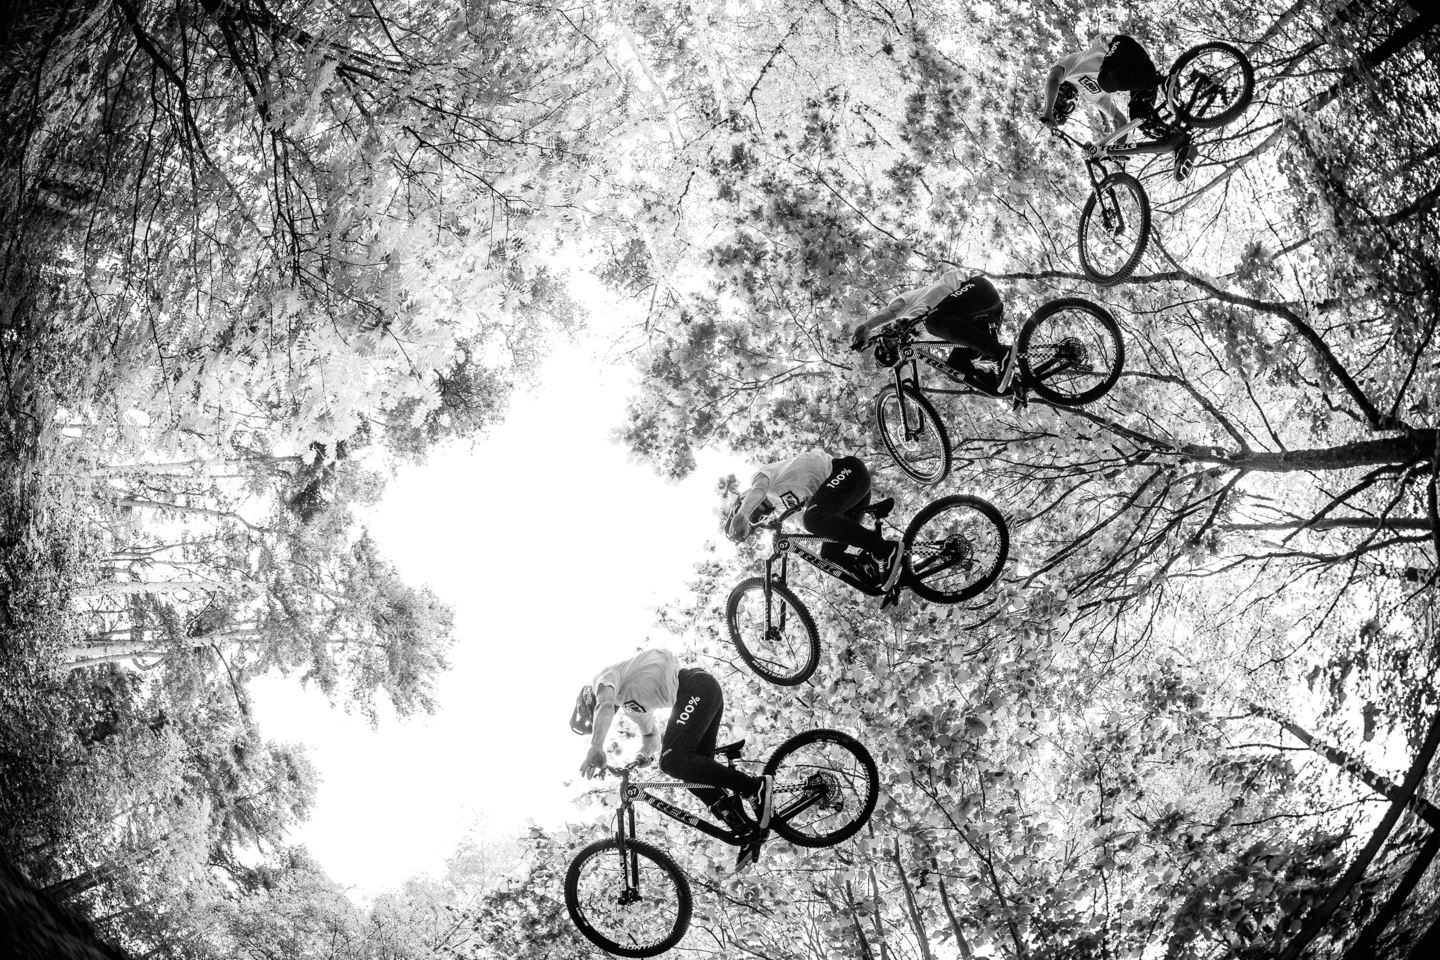 A black and white photo of Kade Edwards doing a trick above the camera.